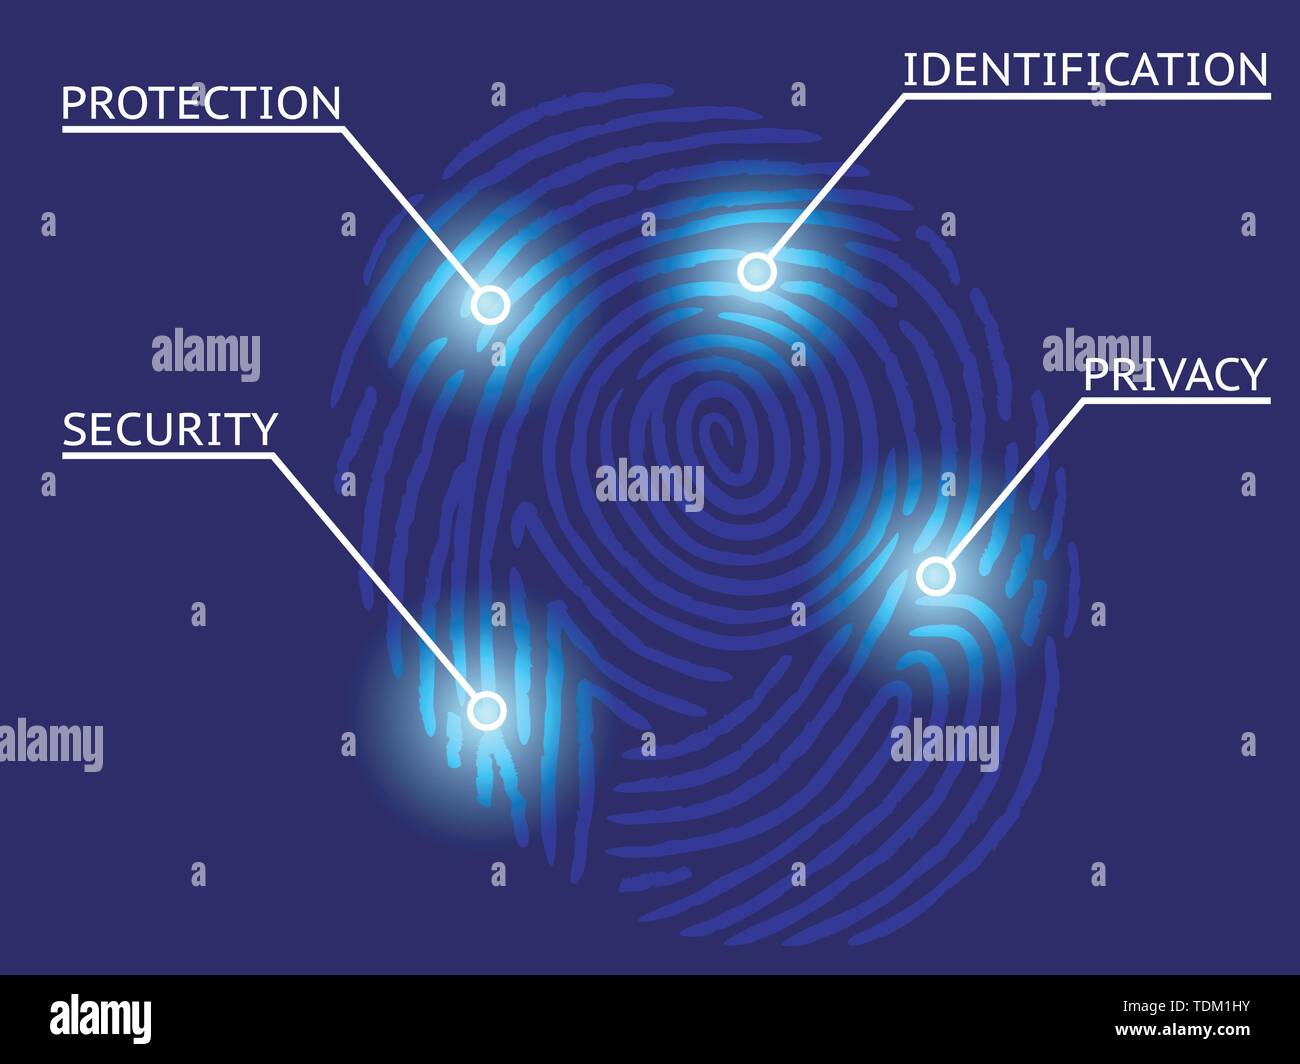 Fingerprint Identification with Whorls - Security and privacy concept Stock Vector